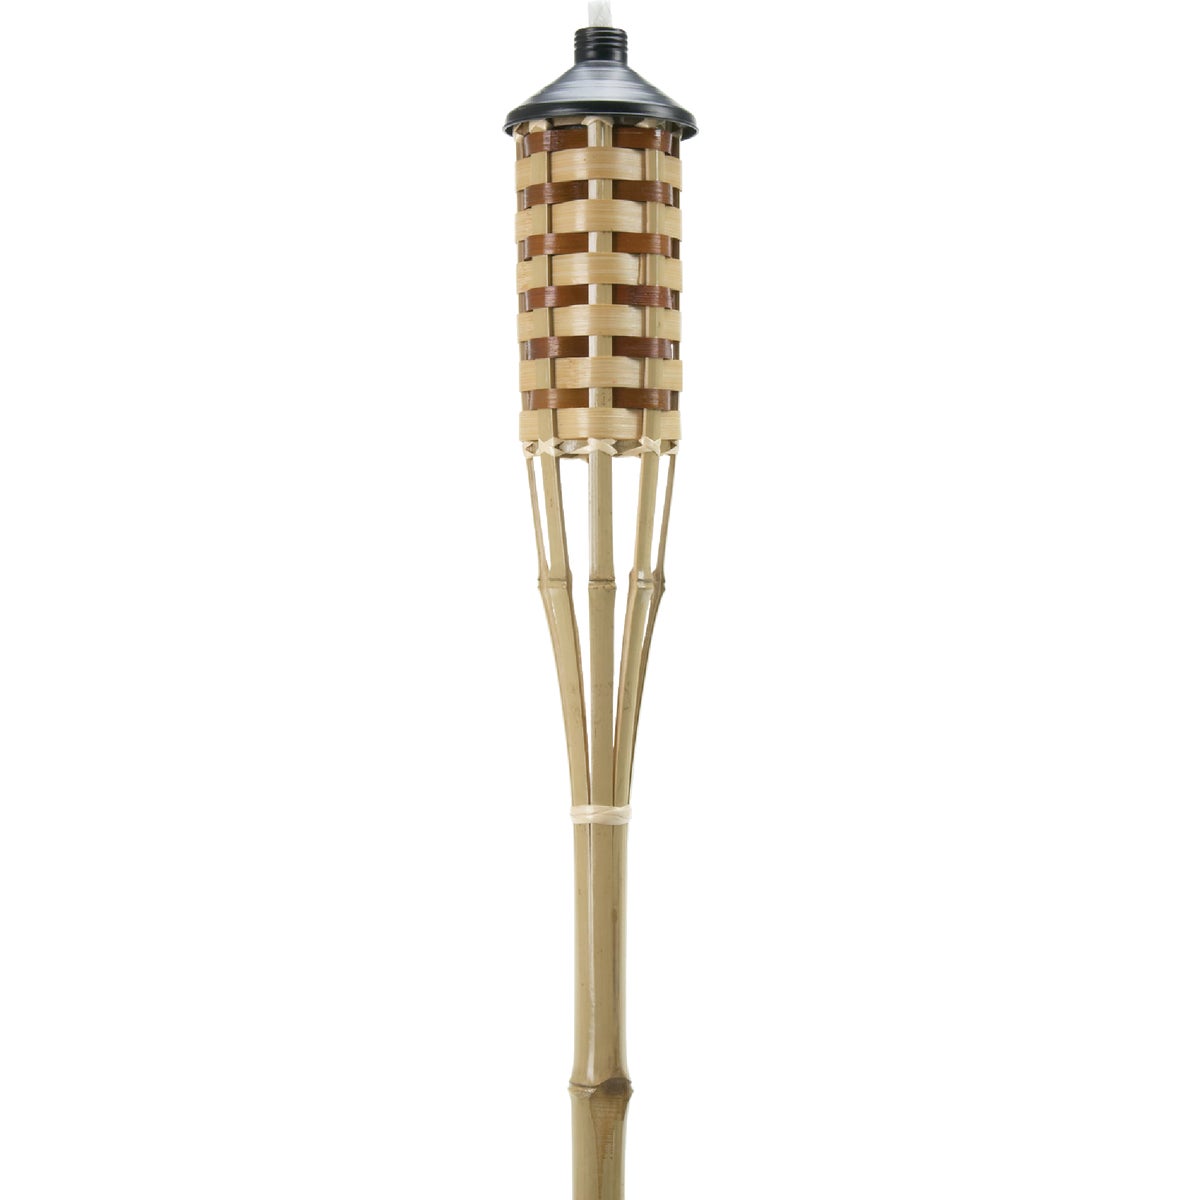 Item 720939, Bamboo patio torch. Features a spike-tipped pole for easy set-up.